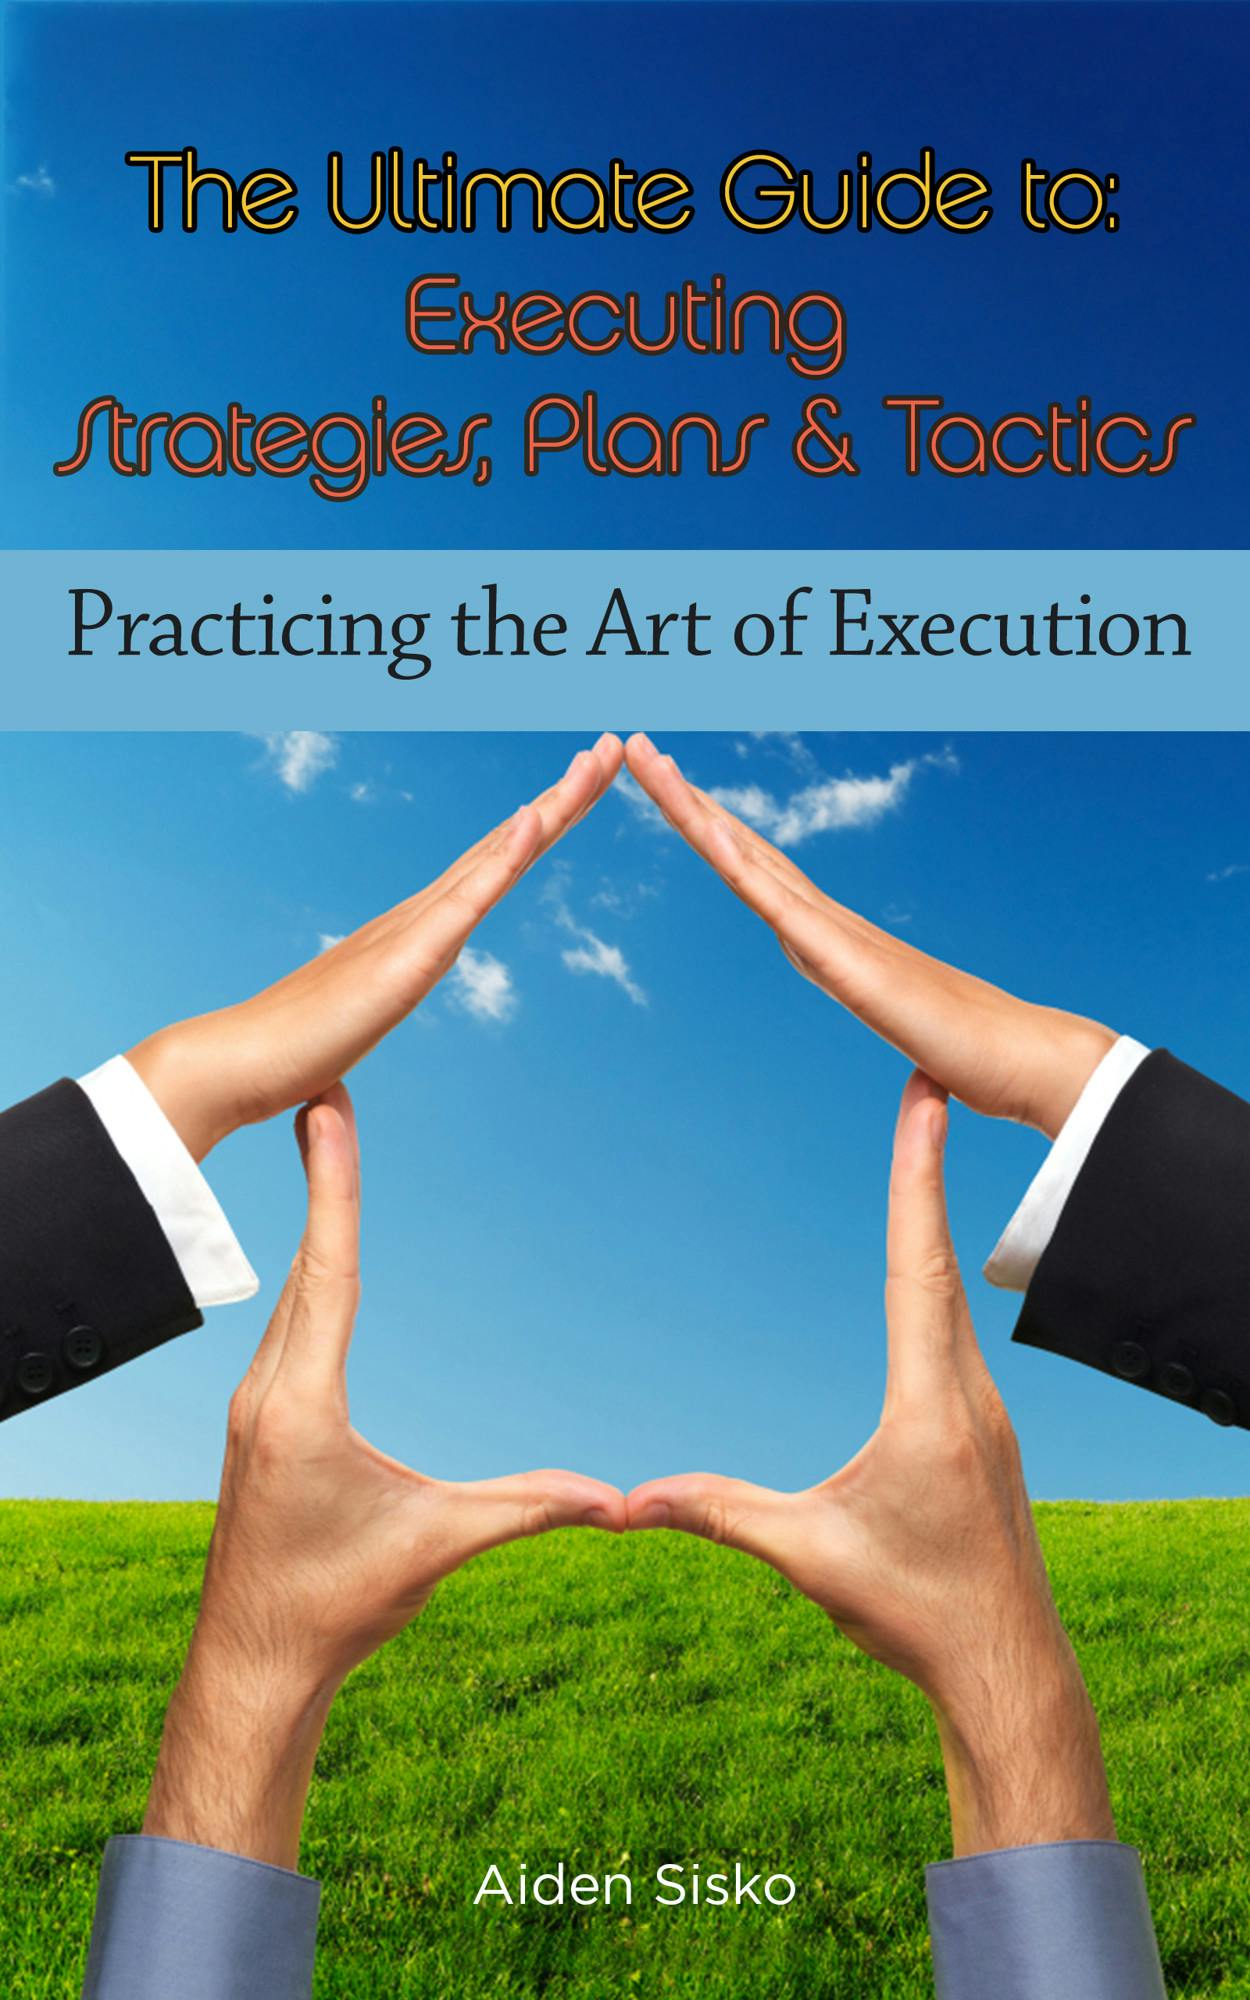 The Ultimate Guide To Executing Strategies, Plans & Tactics - Aiden Sisko